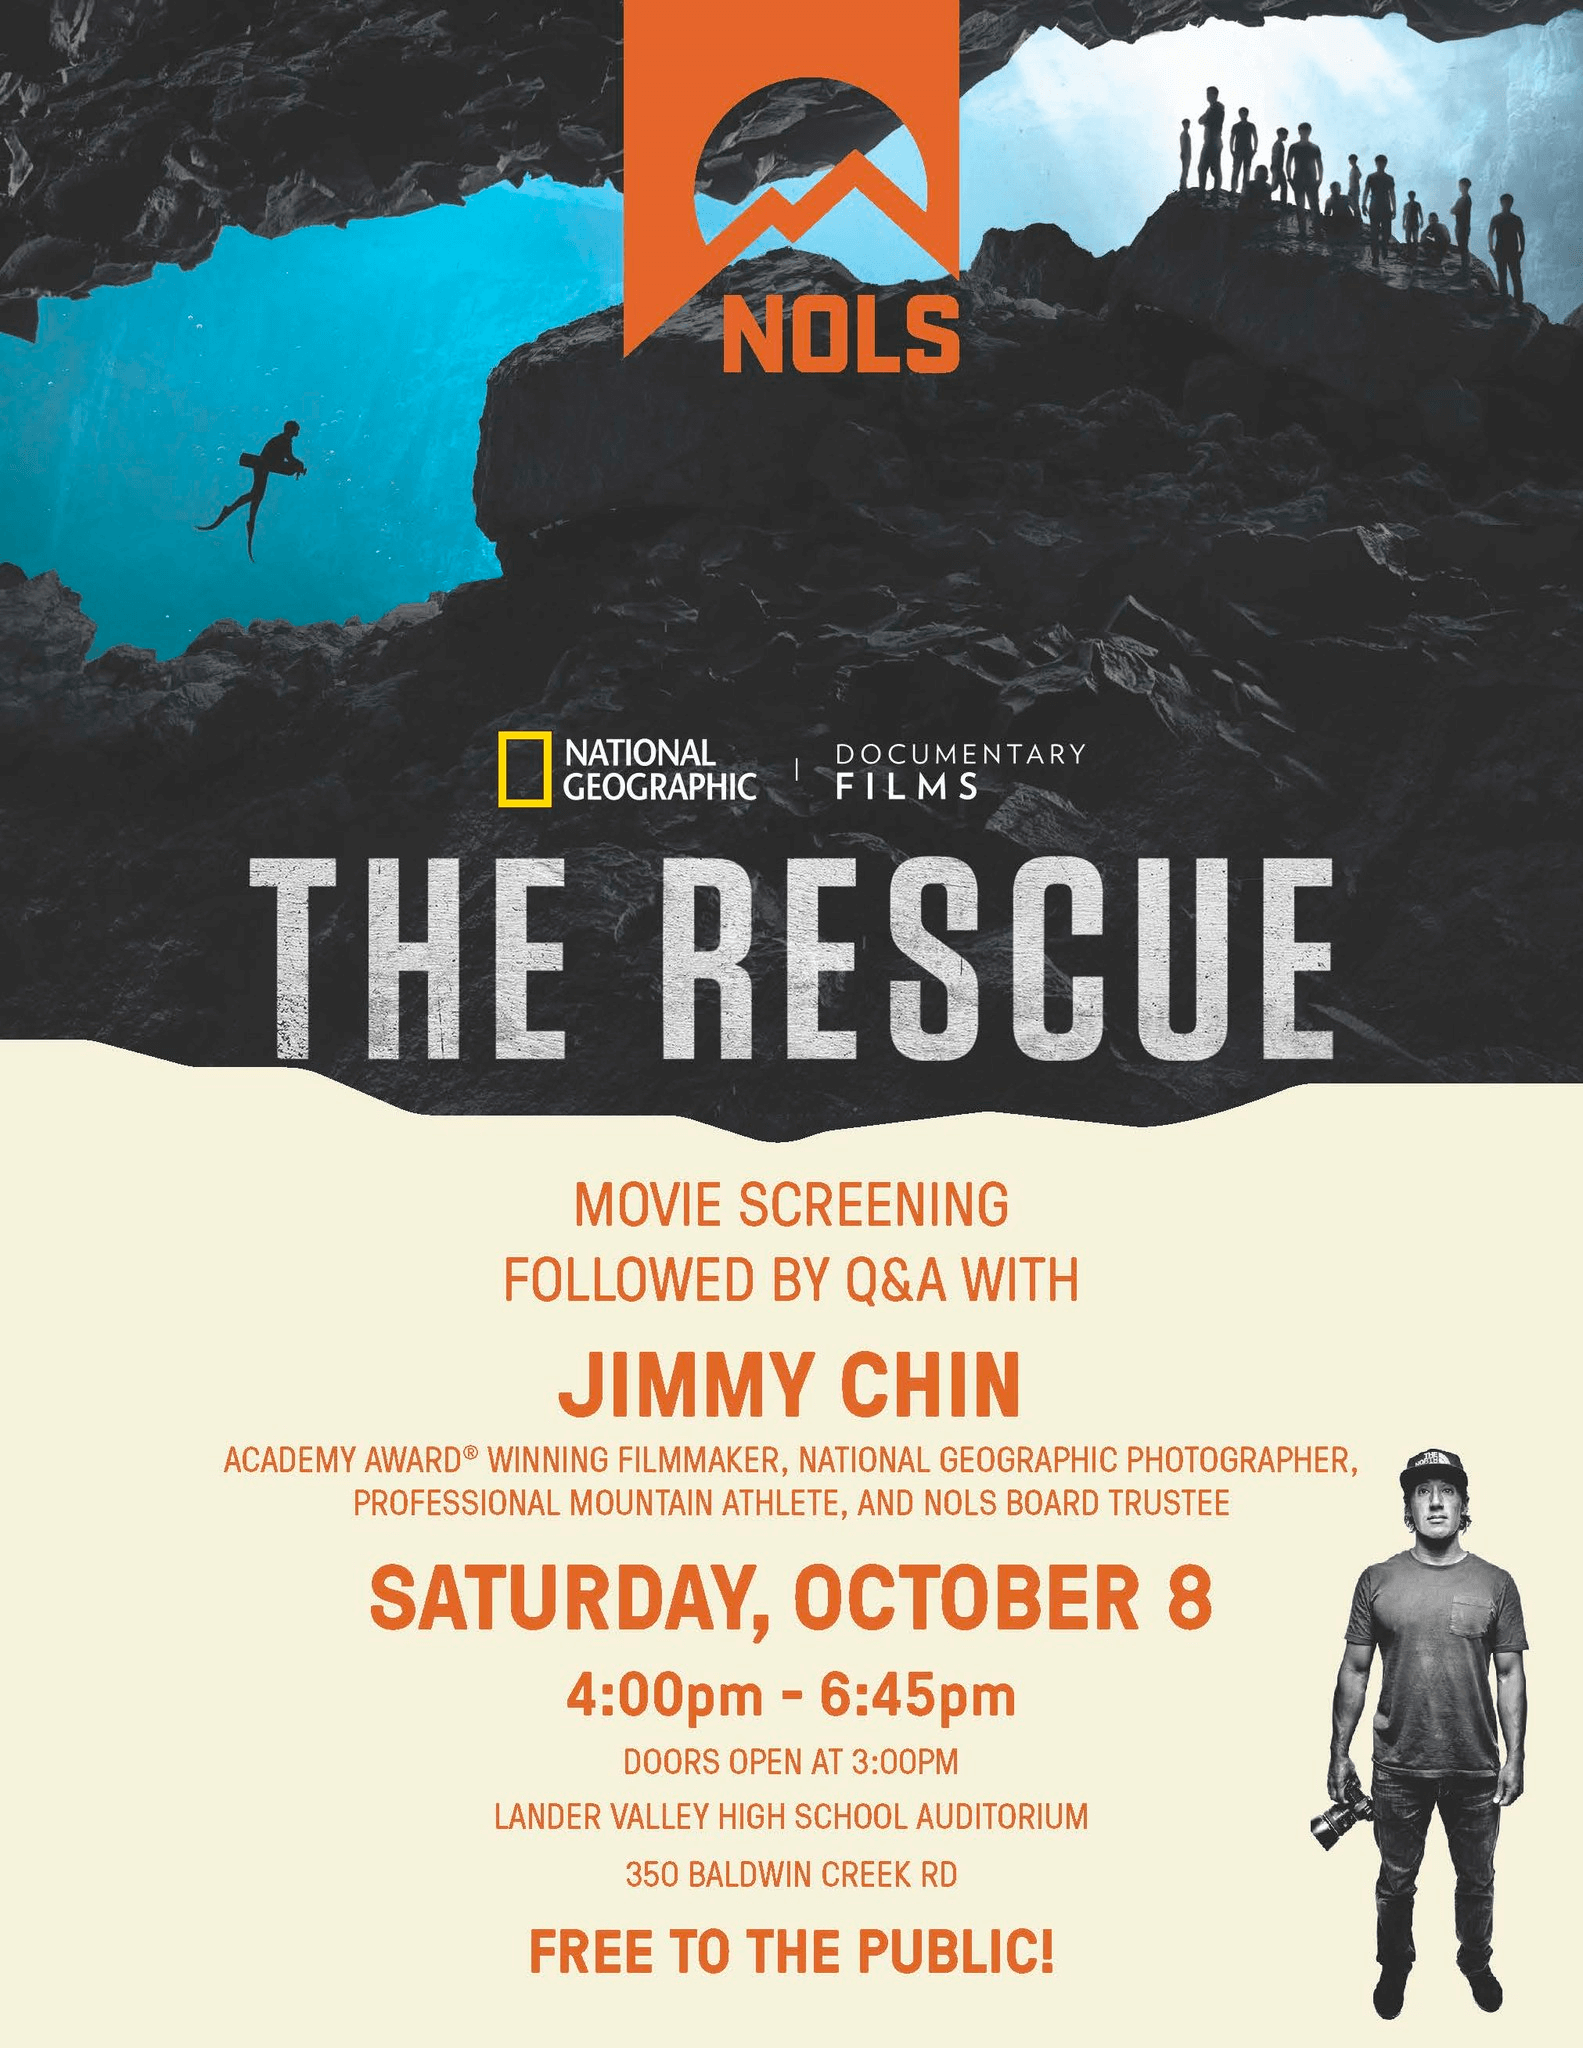 The Rescue Movie Screening with Jimmy Chin